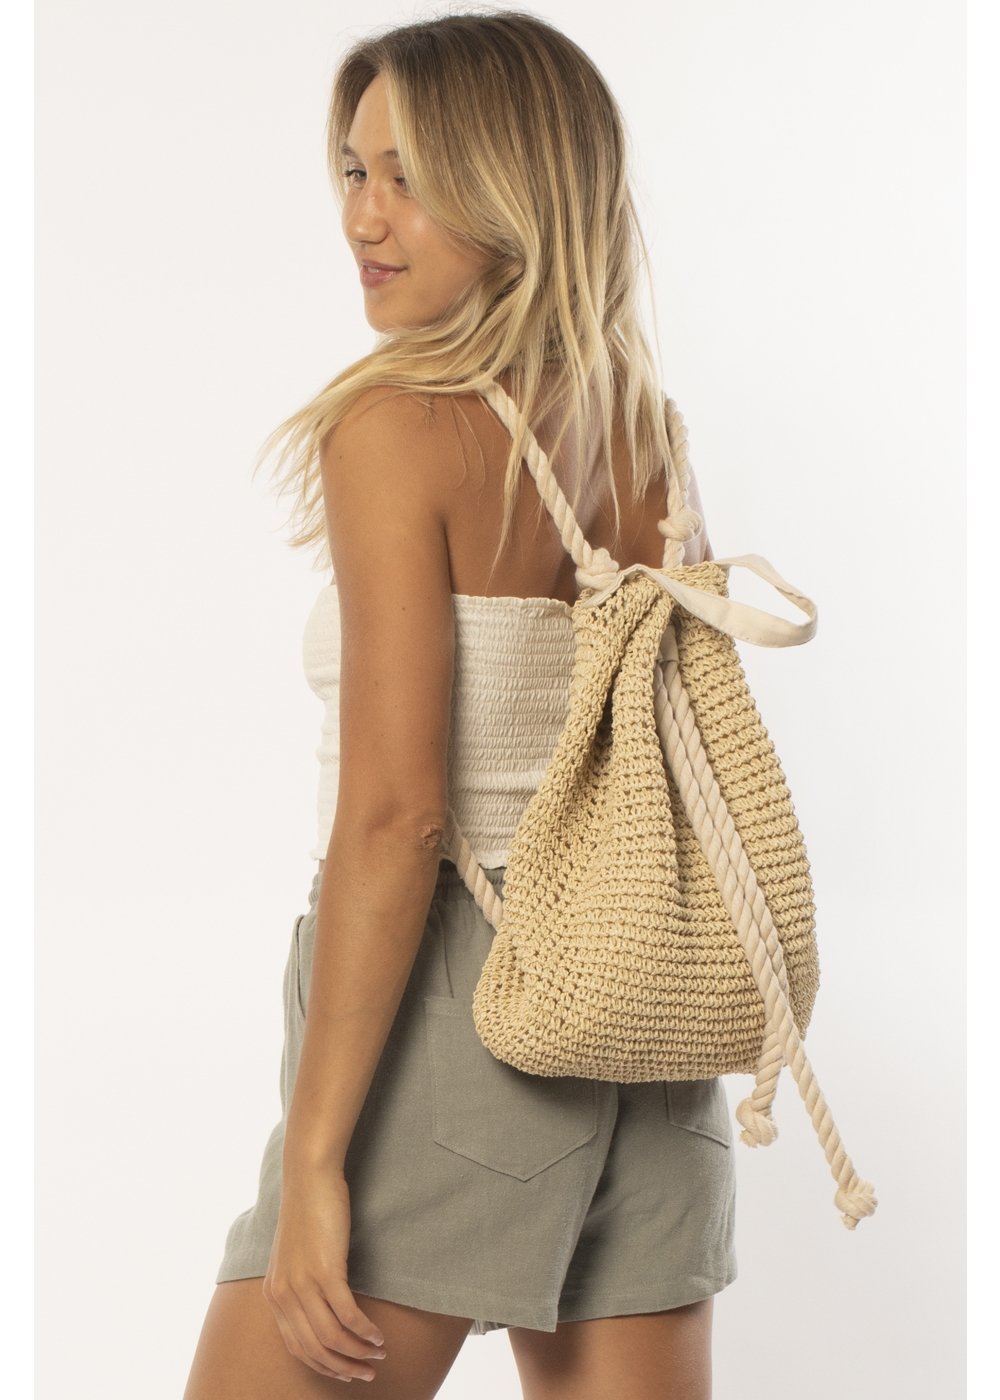 Beach You To It Backpack - Sisstrevolution